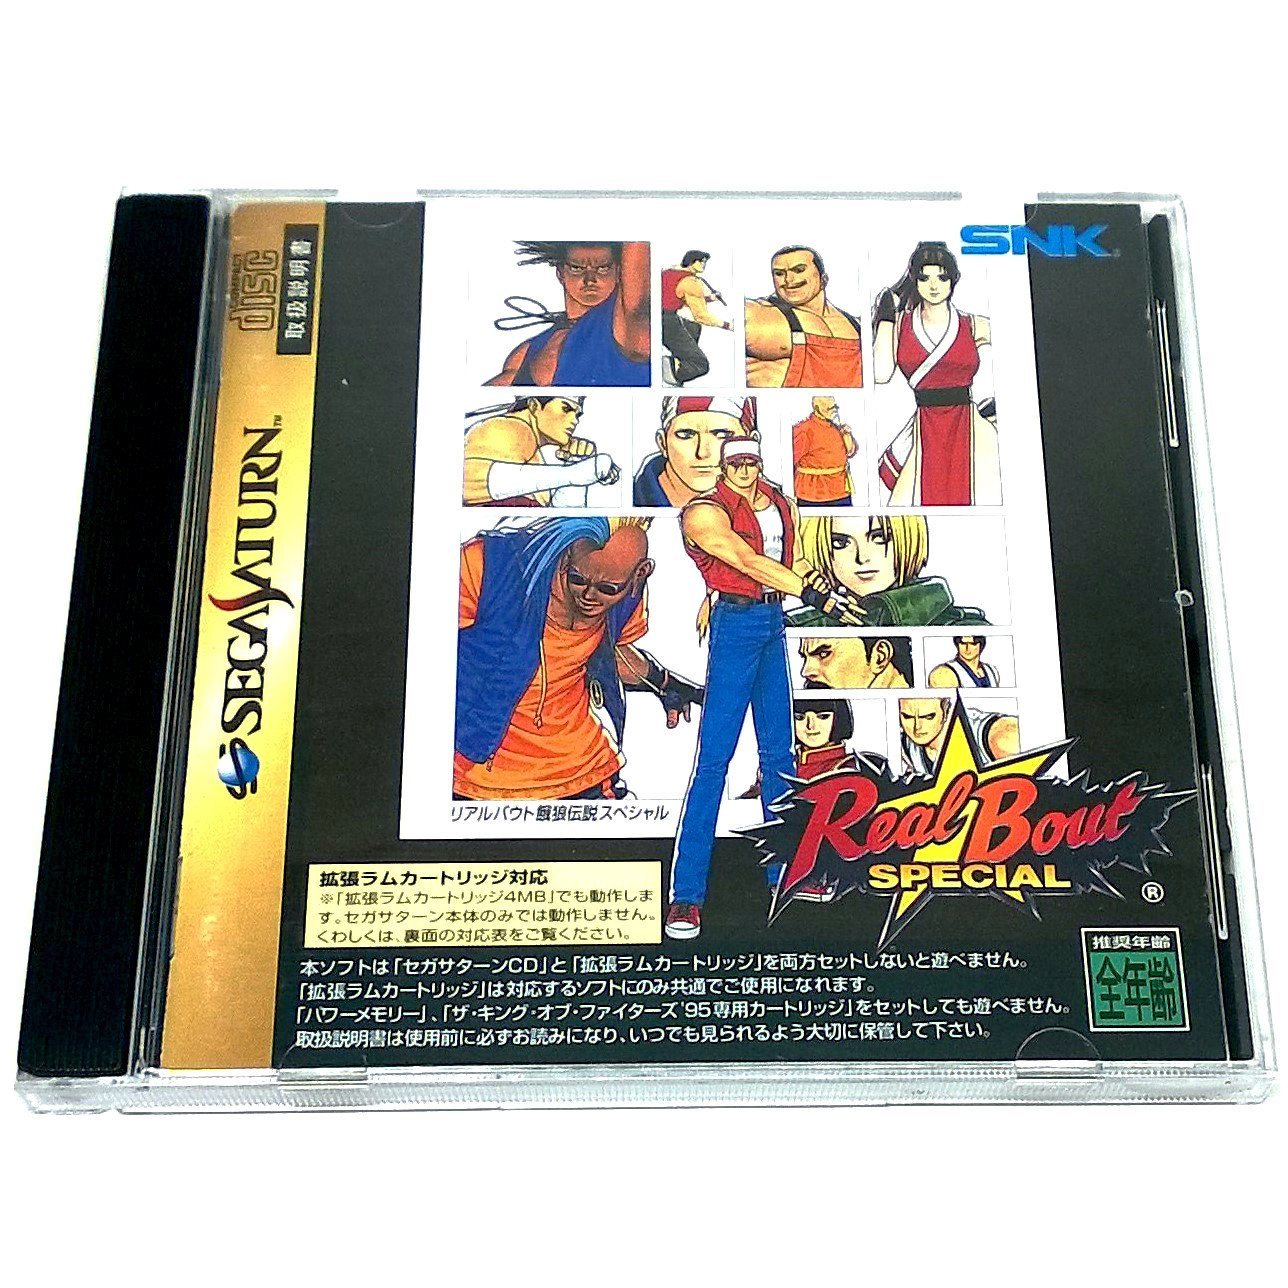 Real Bout Fatal Fury Special for Saturn (import) - Front of case